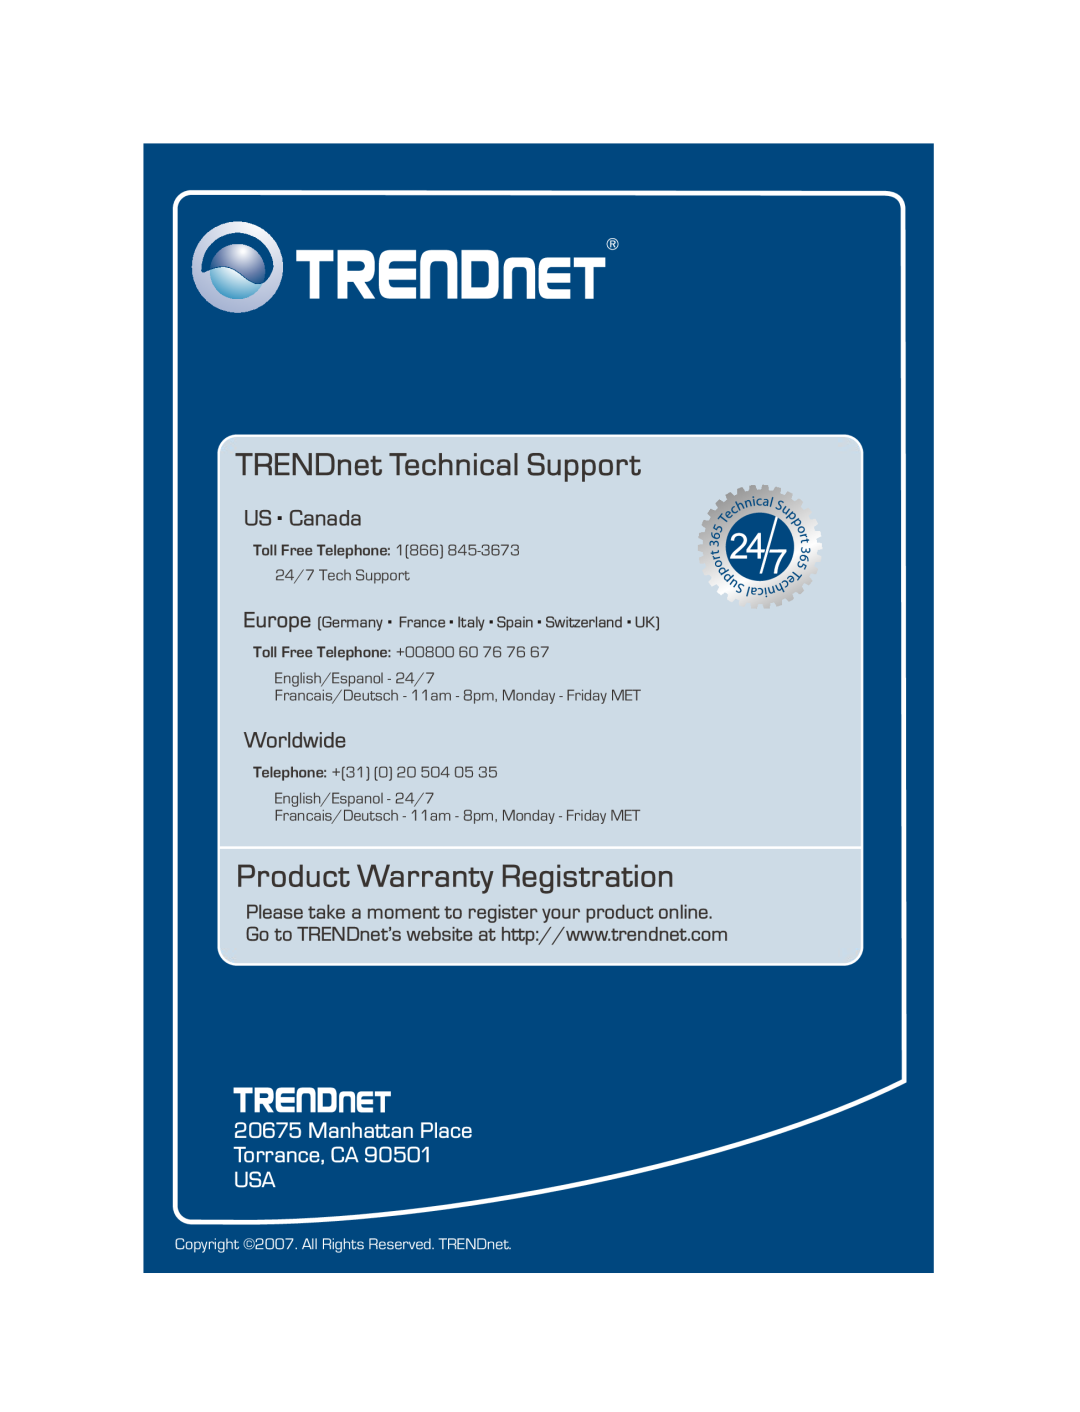 TRENDnet TE100-S16R TRENDnet Technical Support, Product Warranty Registration, US . Canada, Worldwide, Toll Free Telephone 